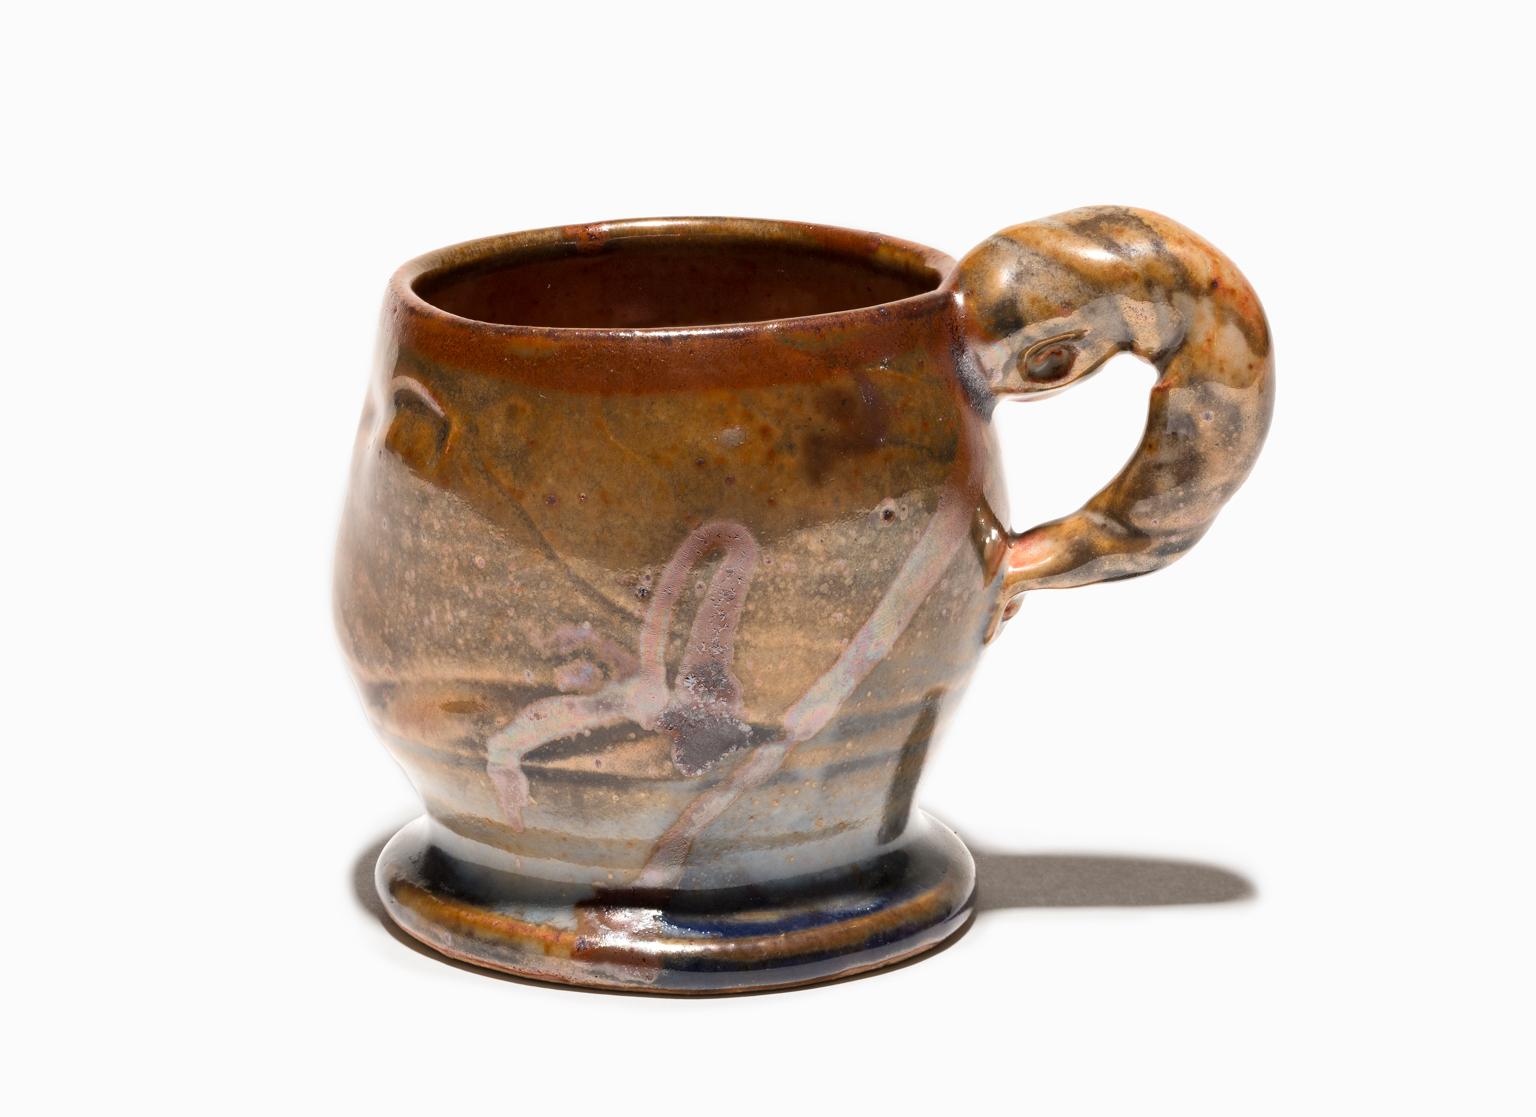 John Glick Plum Street Pottery Reduction Fired Shino Glaze Cup Published in Book For Sale 1